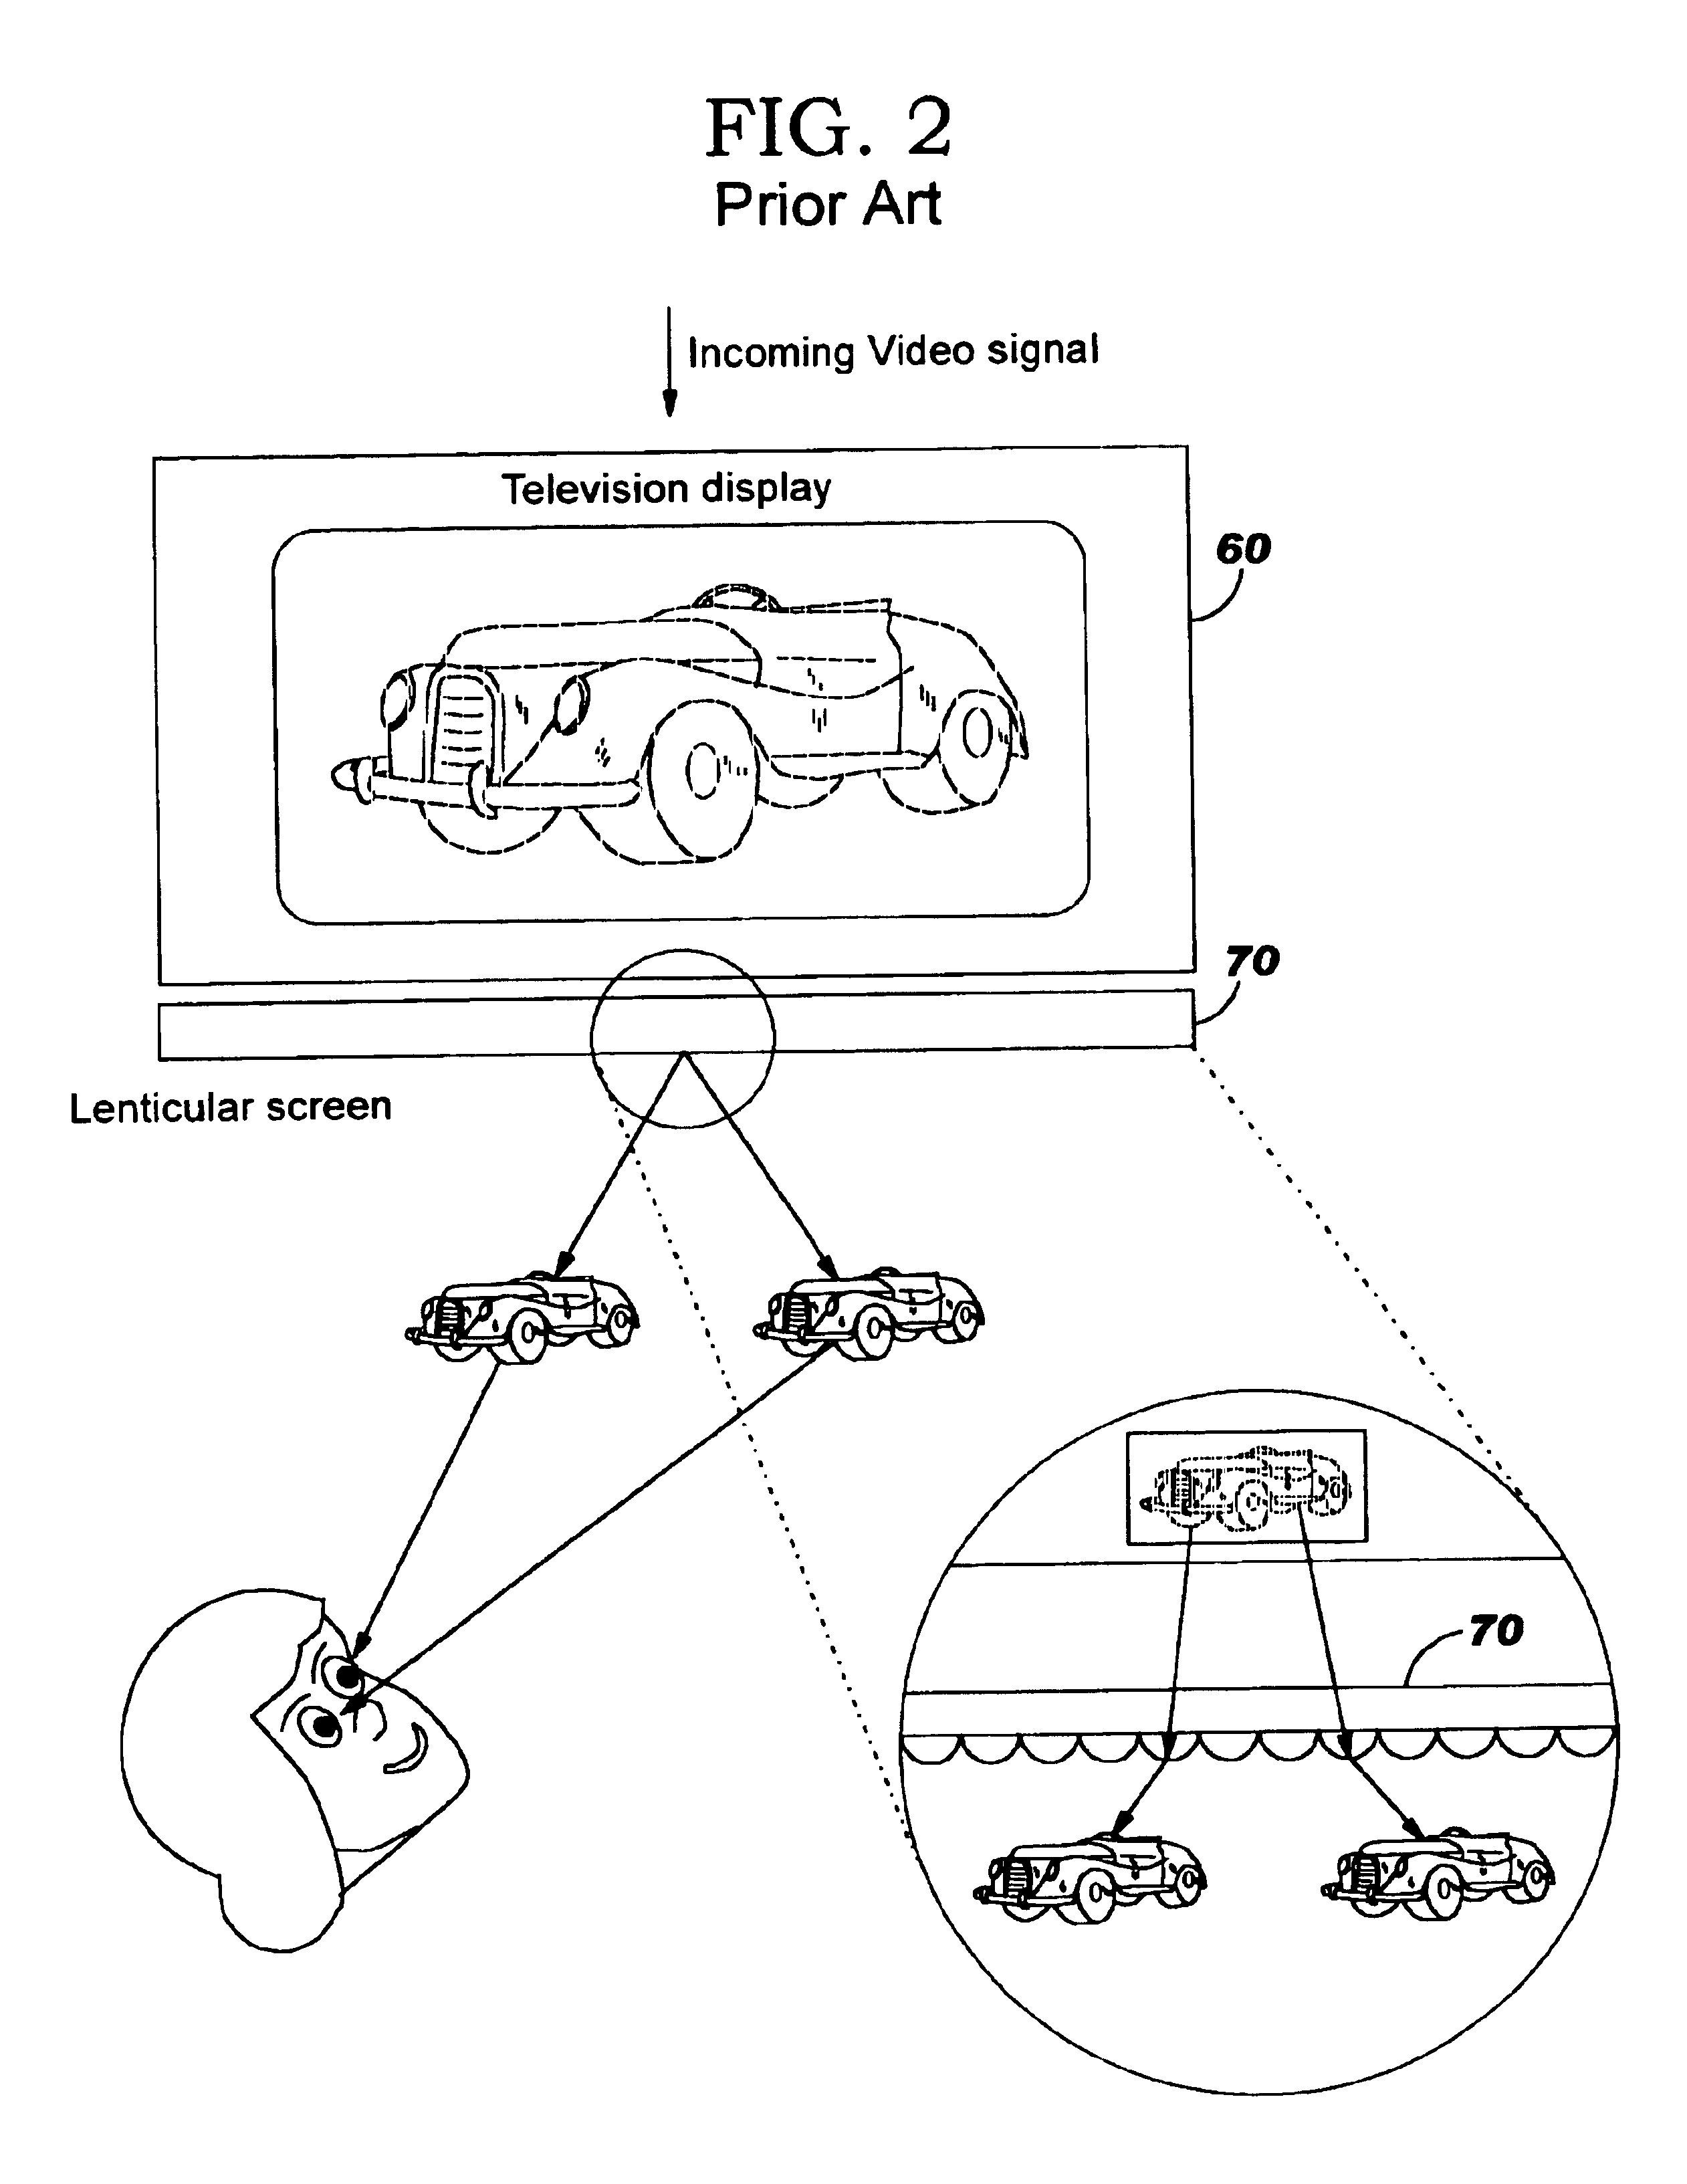 Camera system for three dimensional images and video